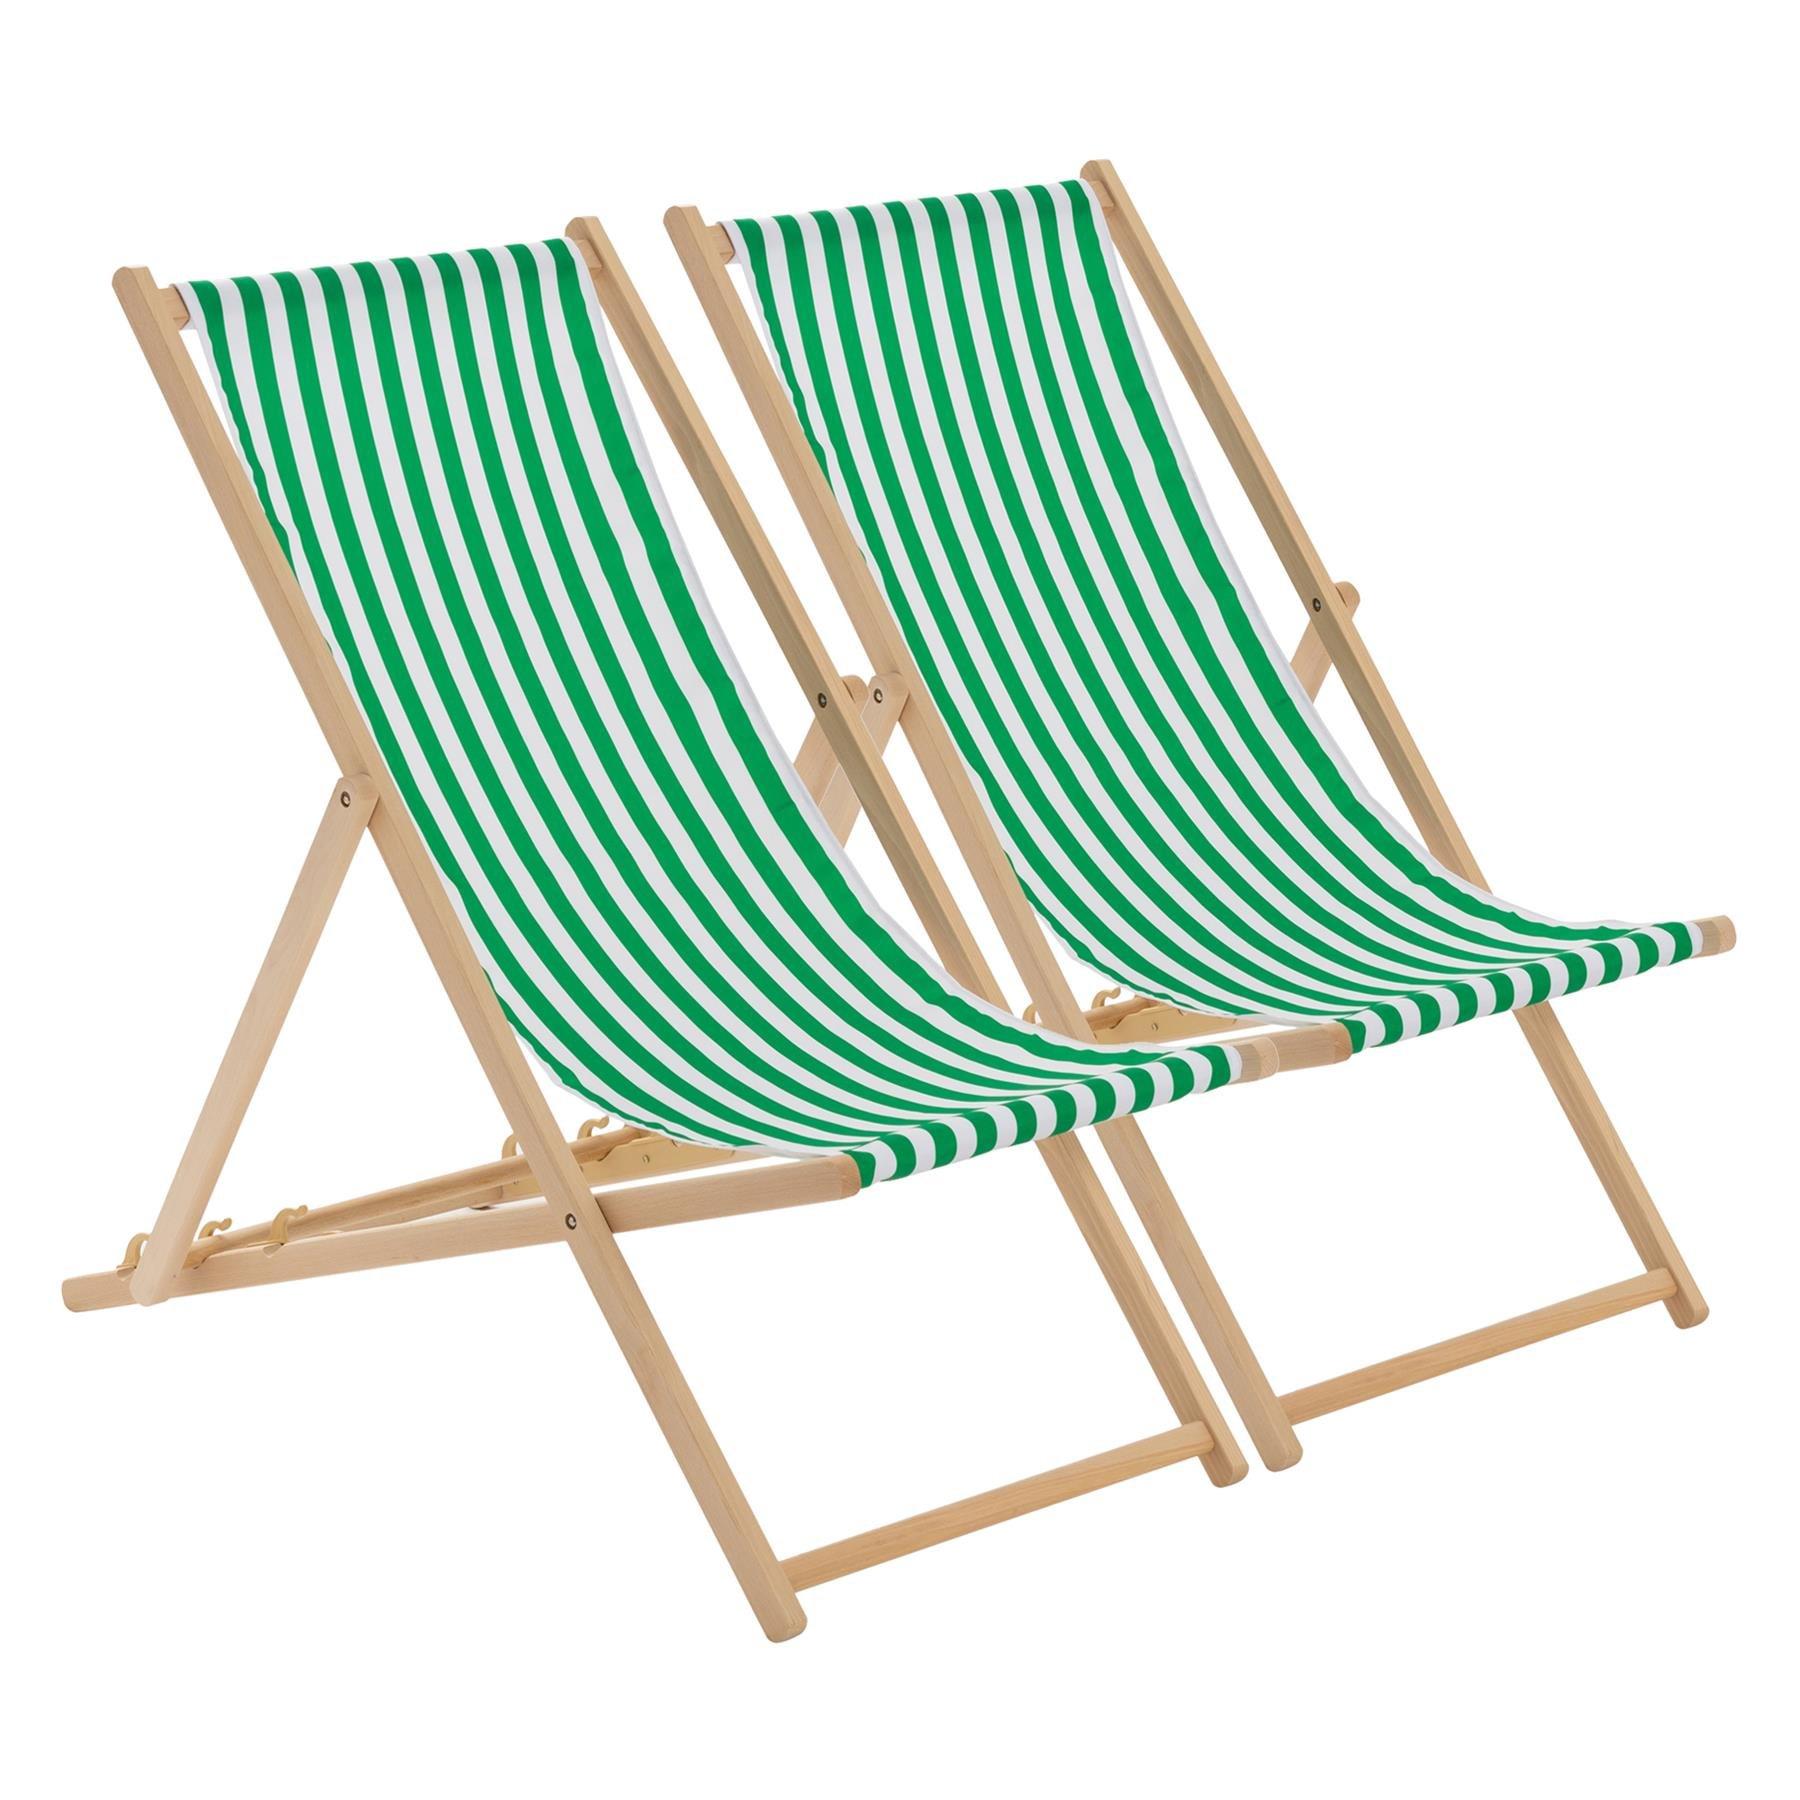 Folding Wooden Deck Chairs Green Stripe Pack of 2